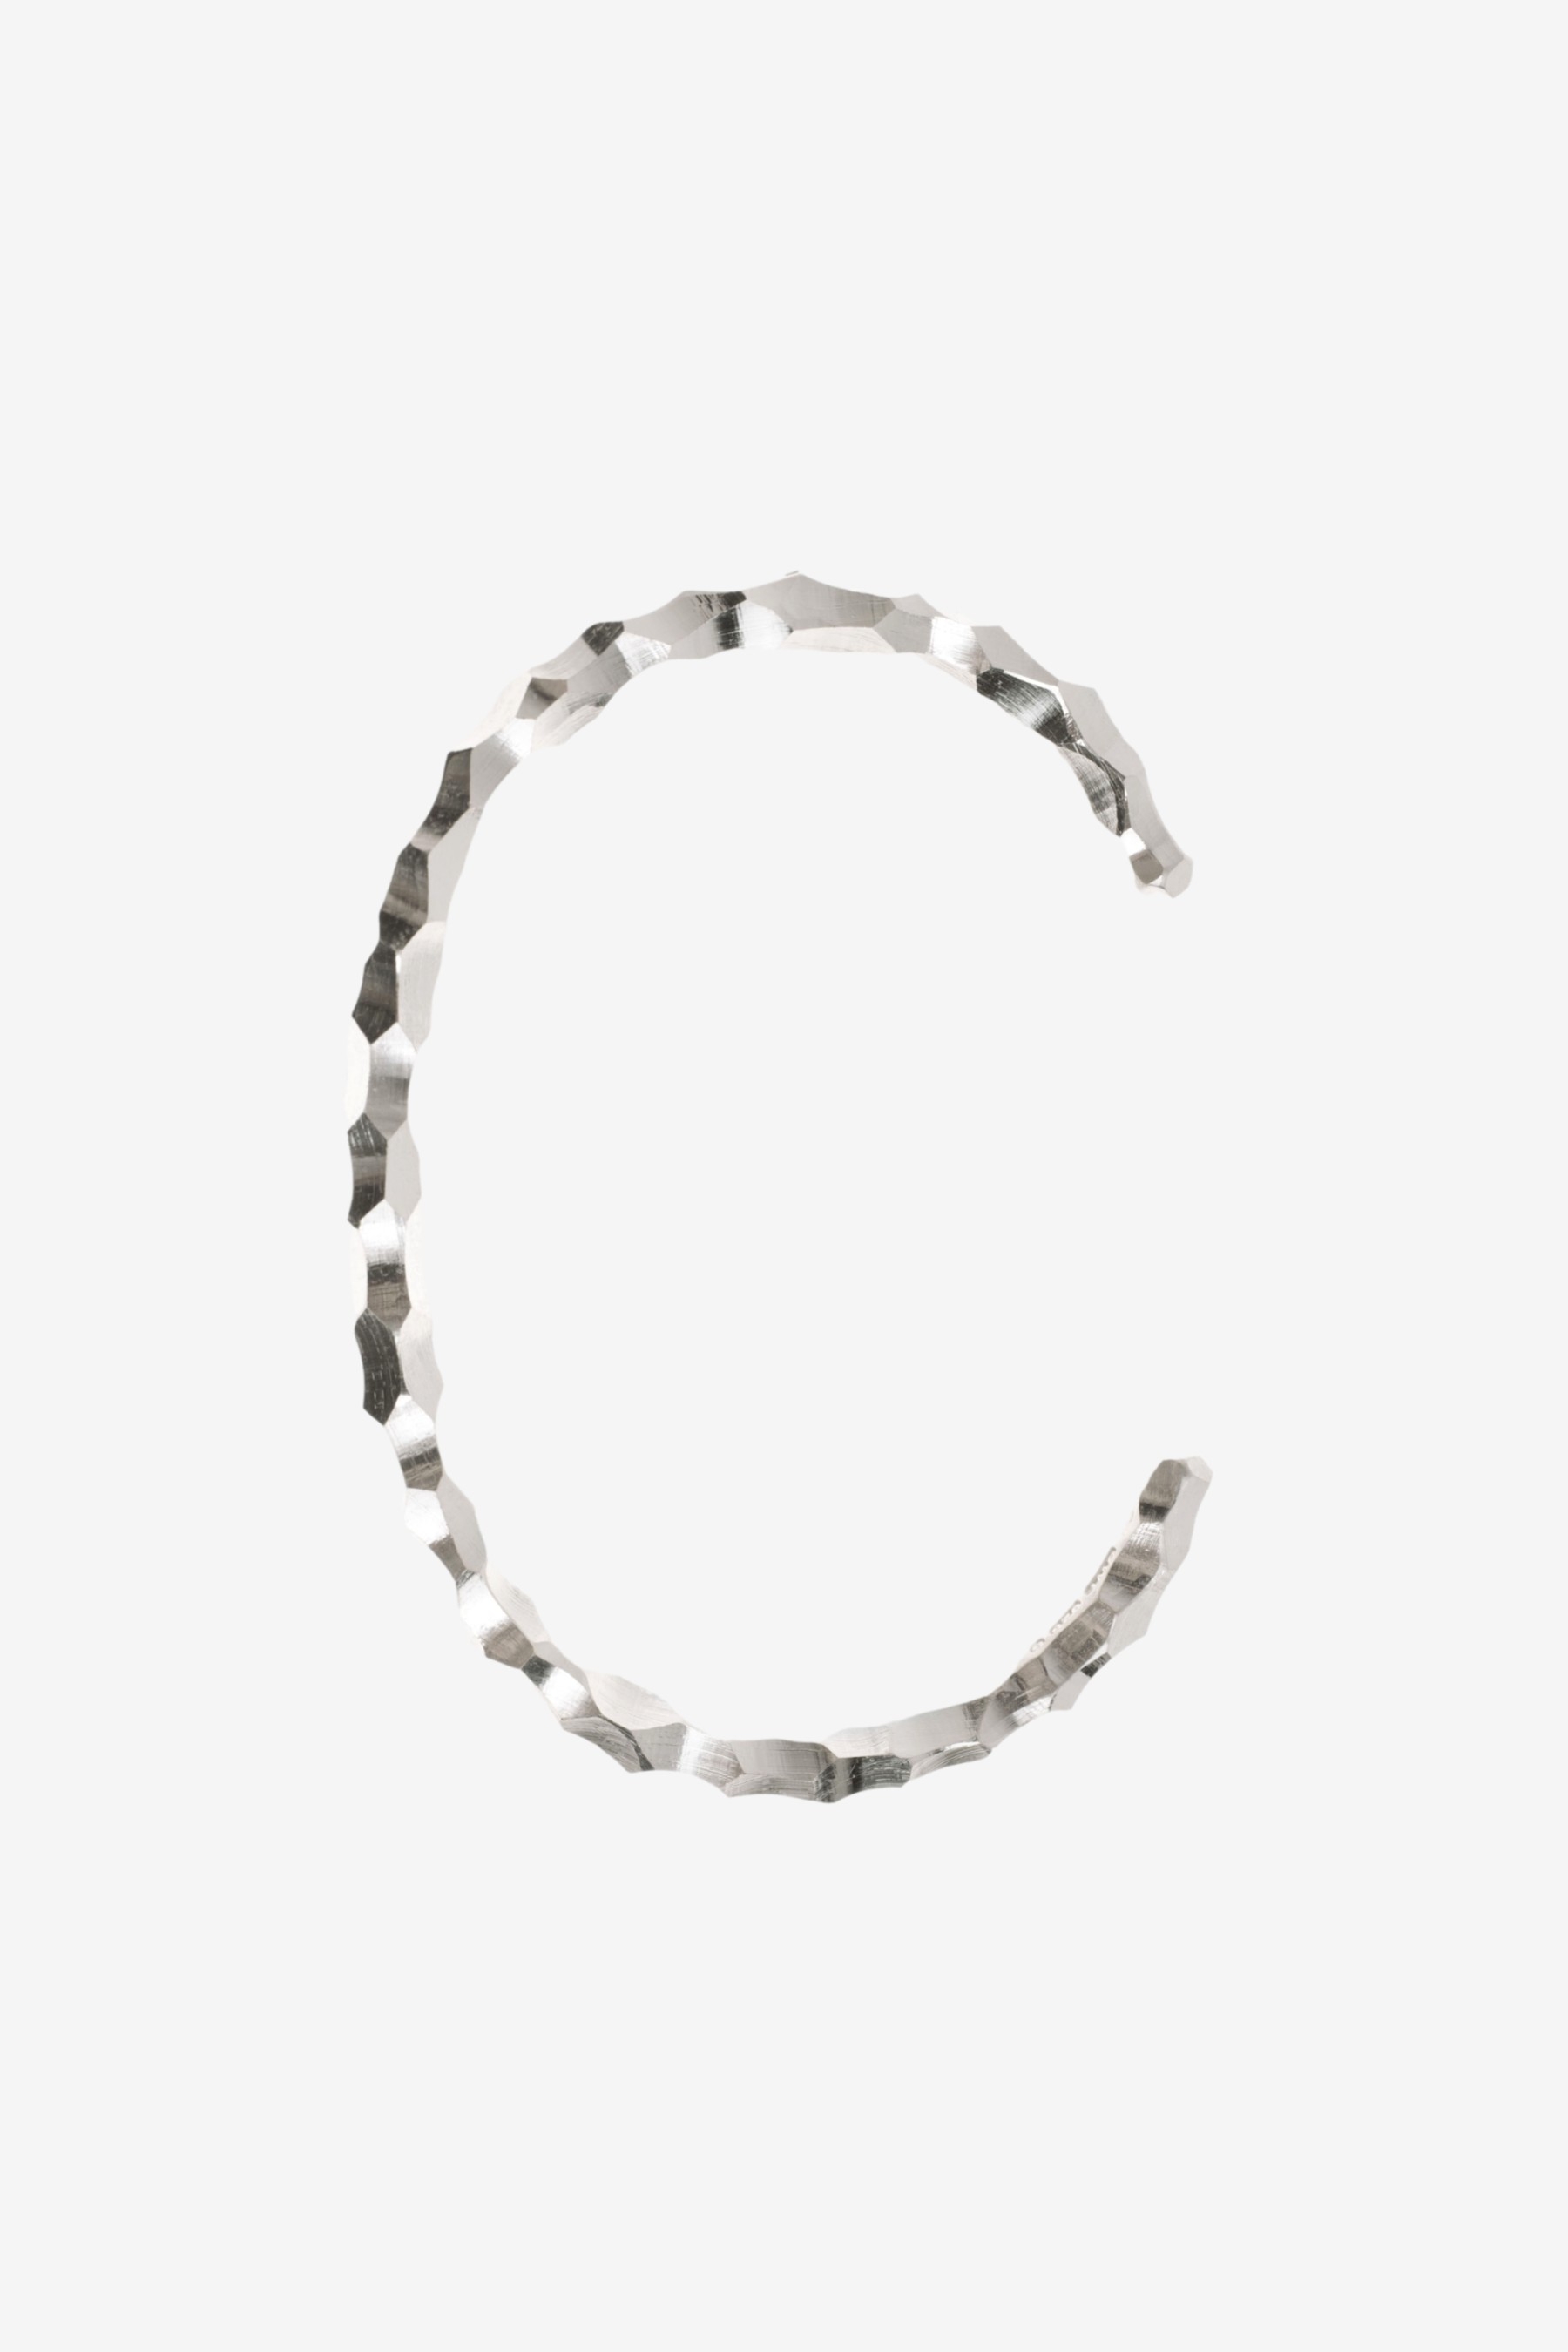 Hungry Snake Bracelet - Carved Silver - All Blues | Afura Store